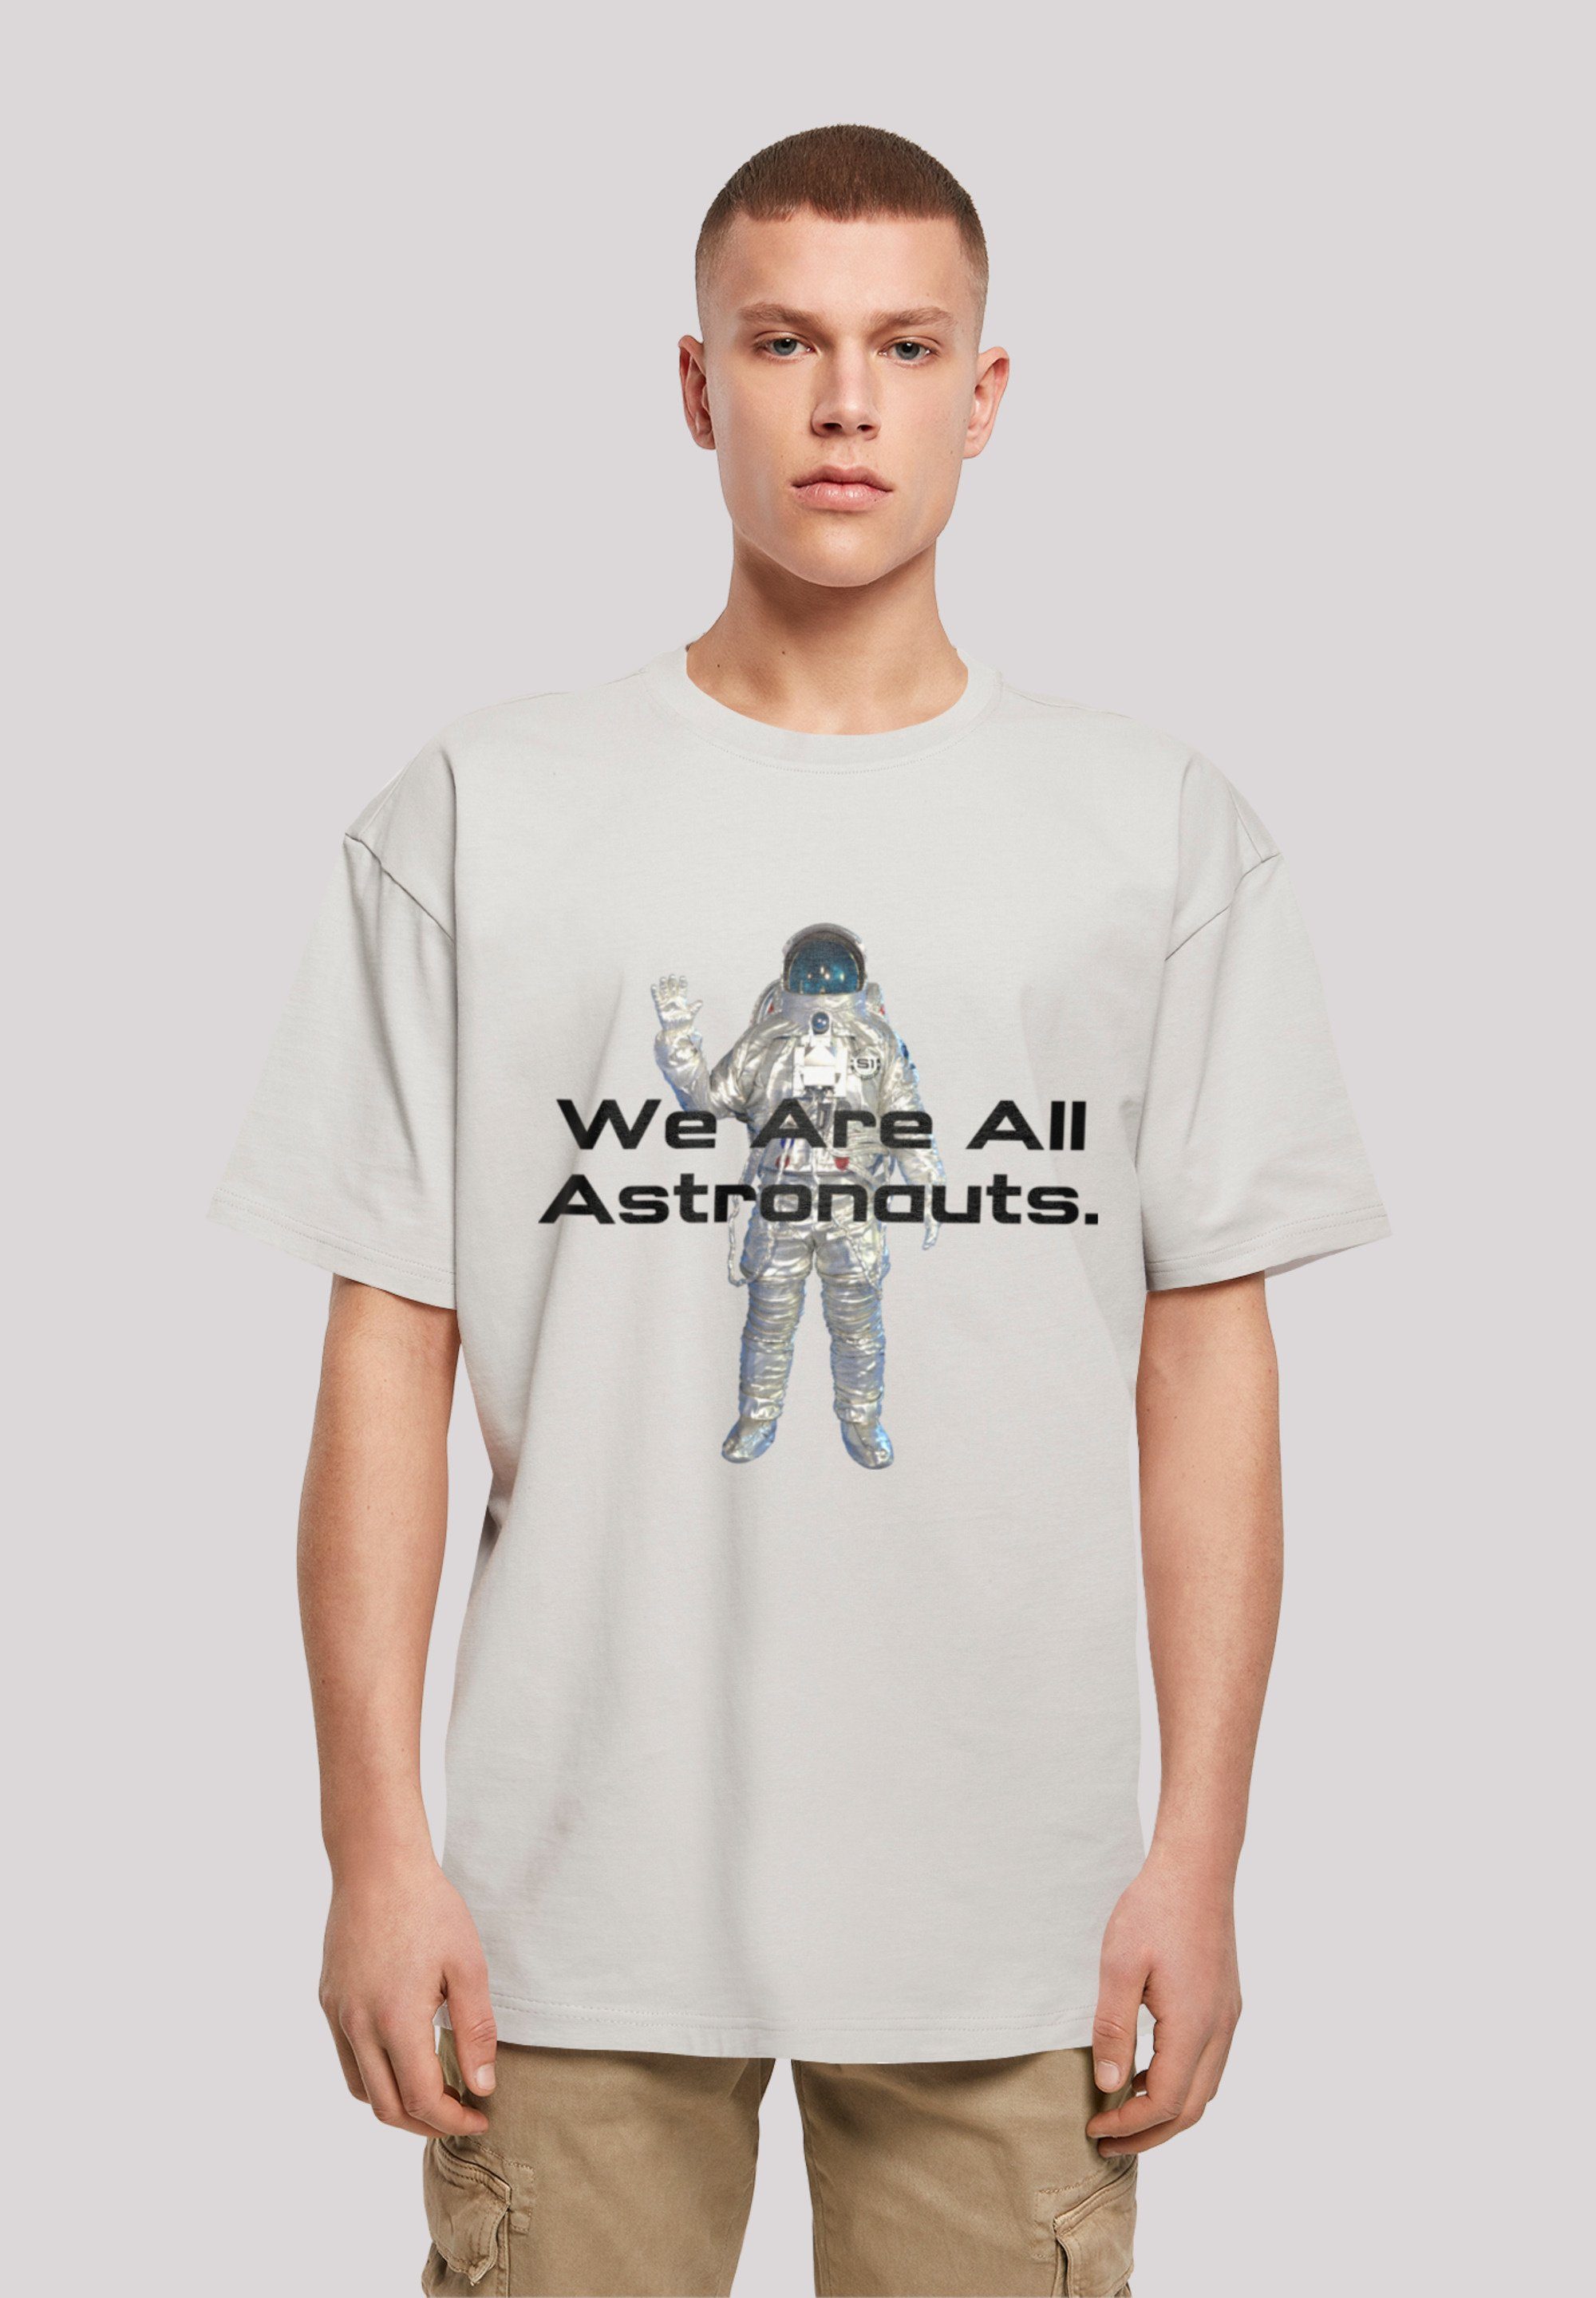 F4NT4STIC T-Shirt are all Print We astronauts PHIBER SpaceOne